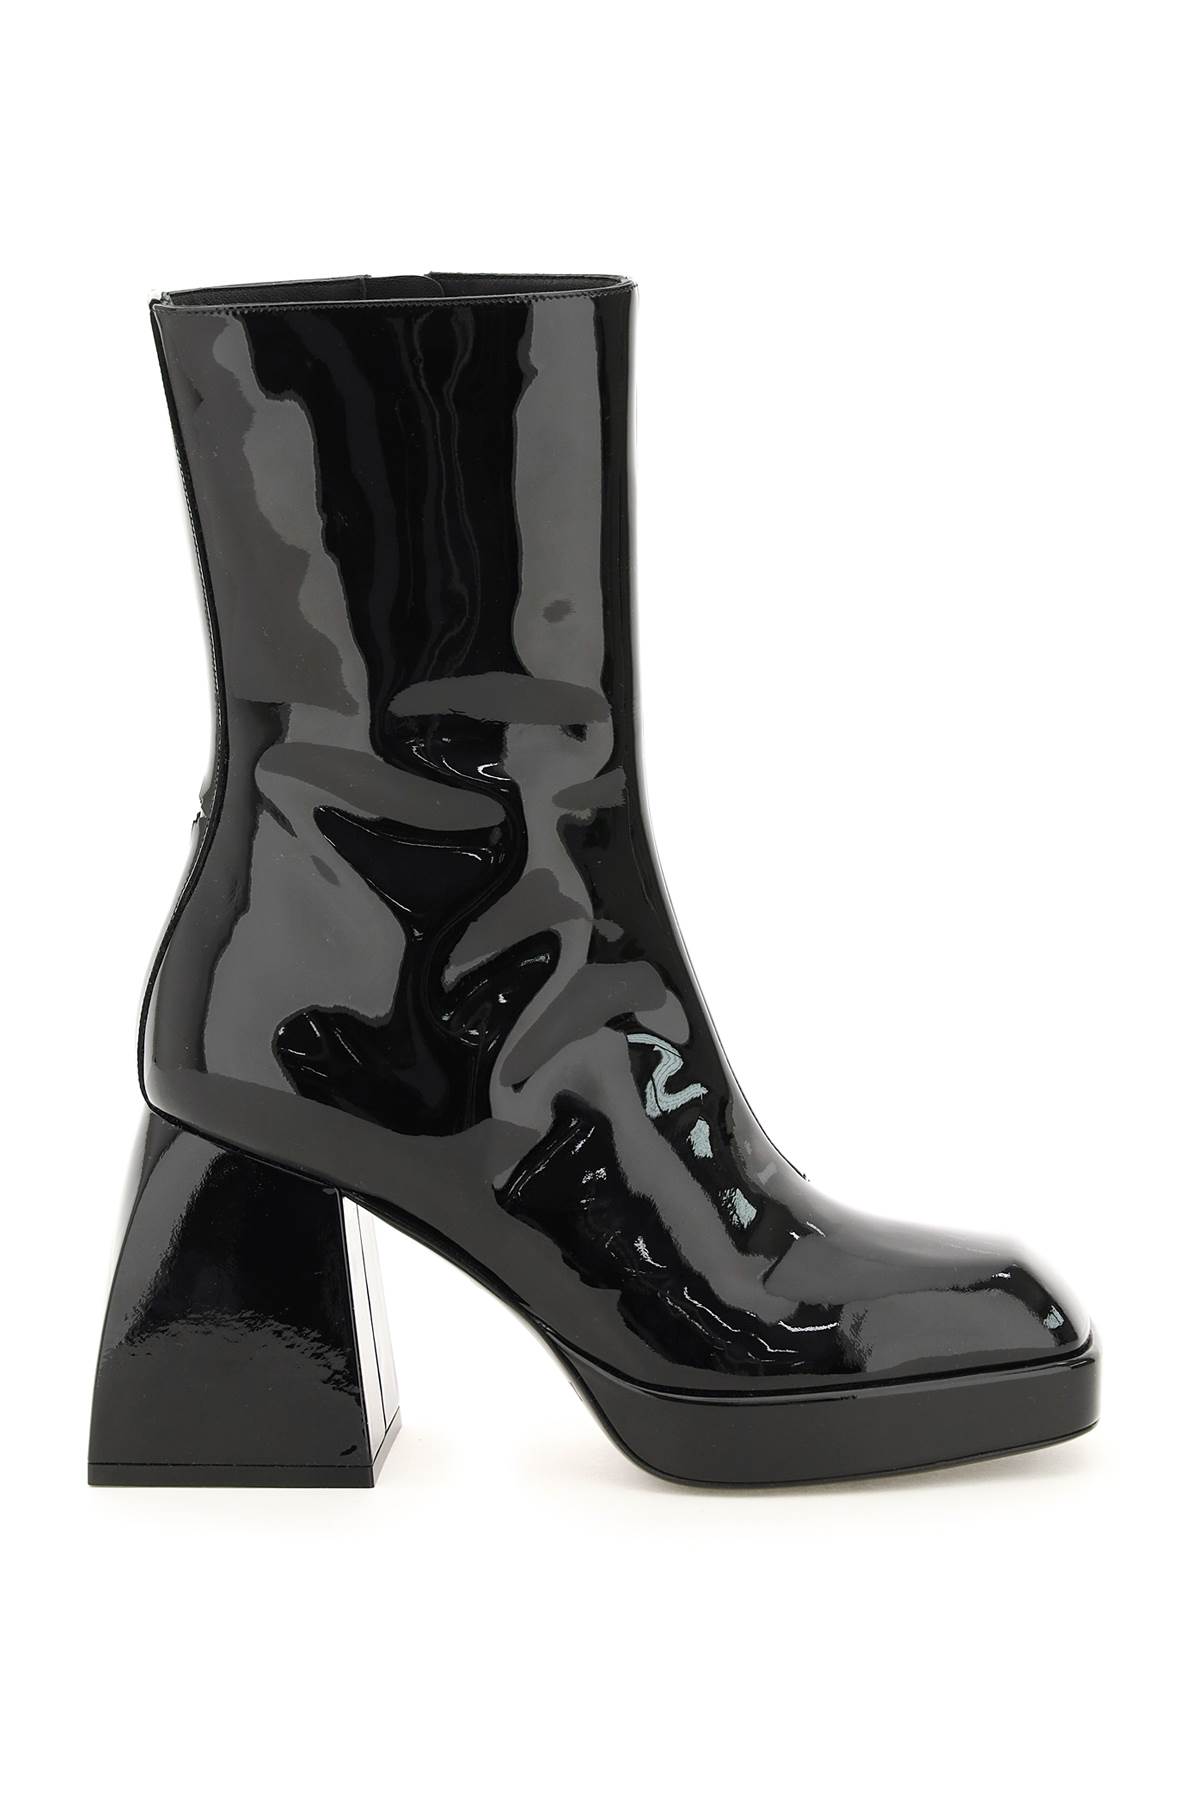 Nodaleto Bulla Corta Patent Leather Ankle Boots